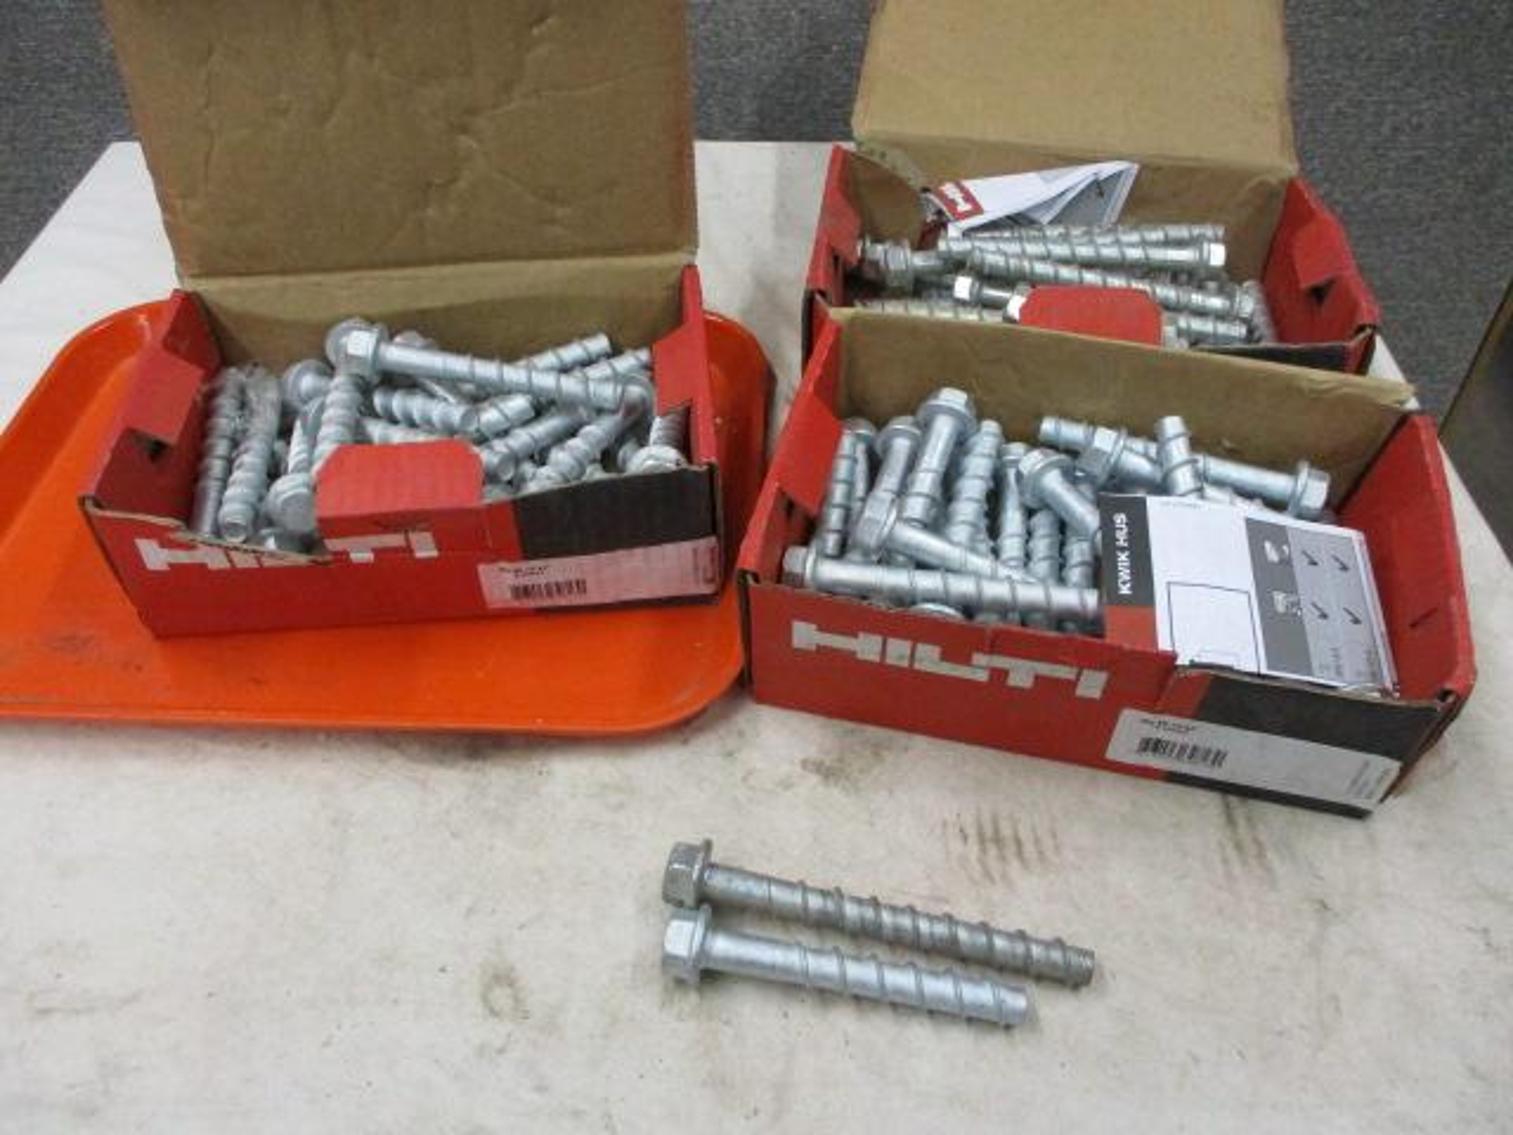 Hardware Auction: Nuts, Bolts, Screws, Anchors